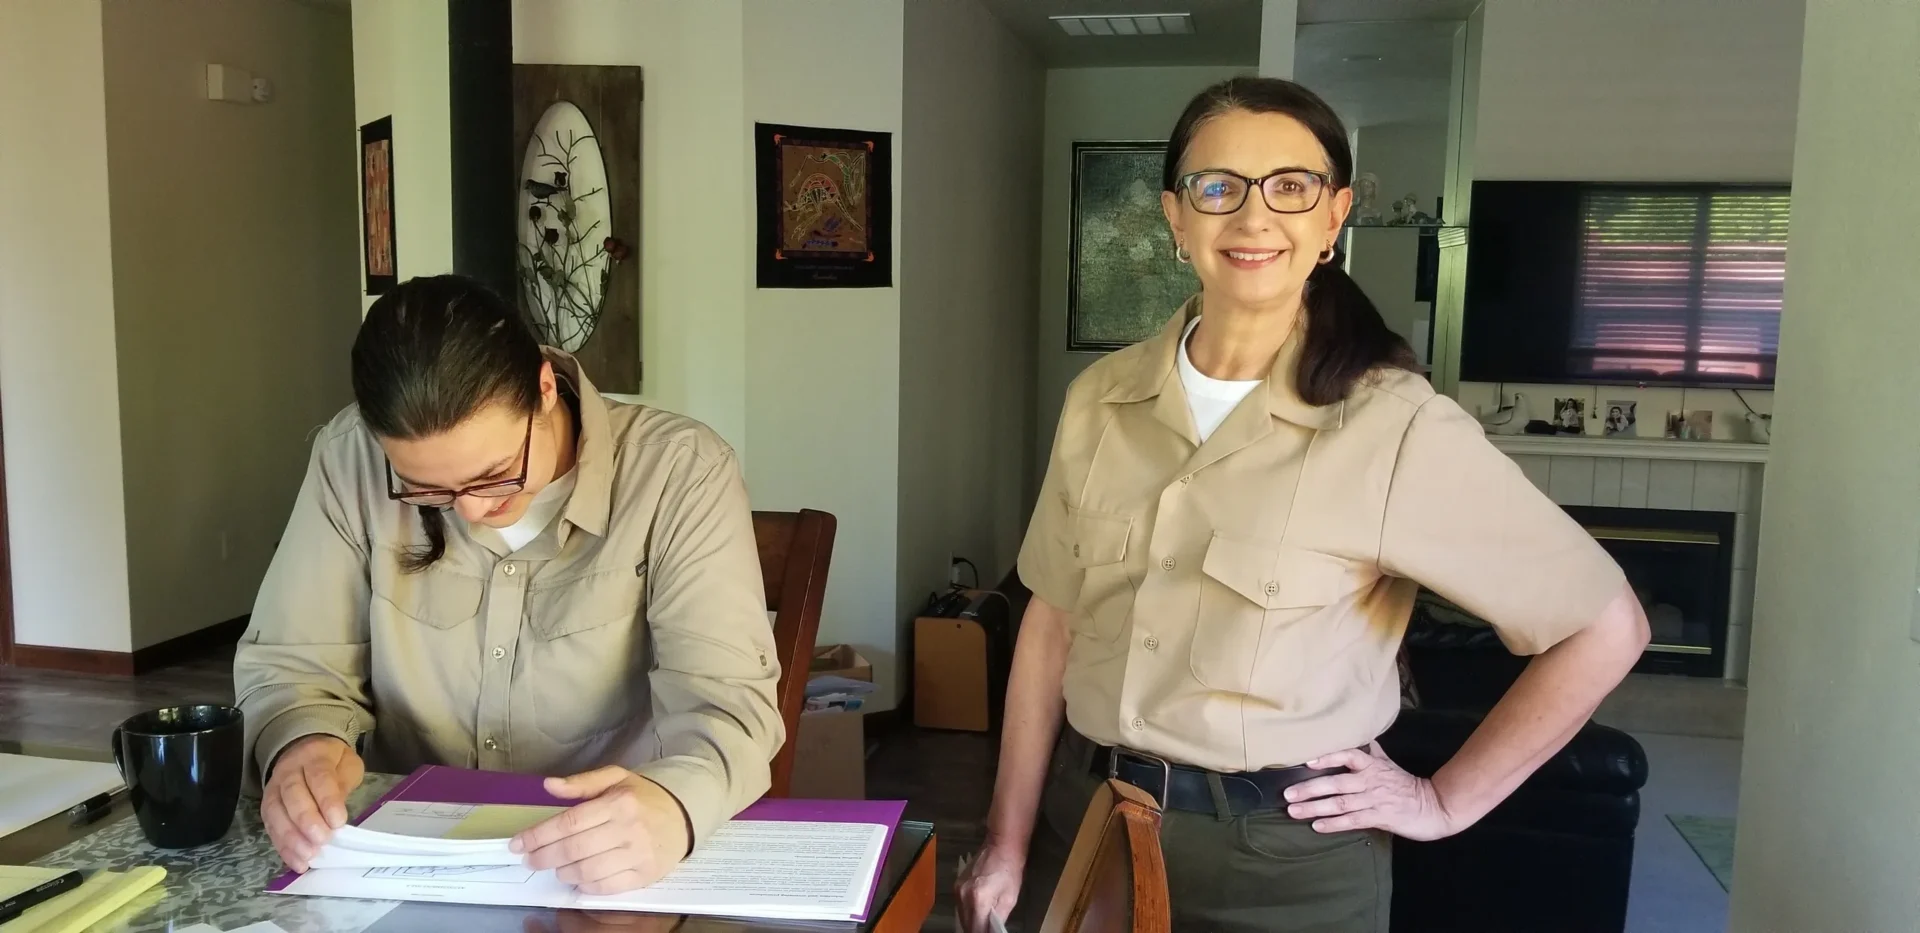 Two women in tan shirts and glasses are at a table.